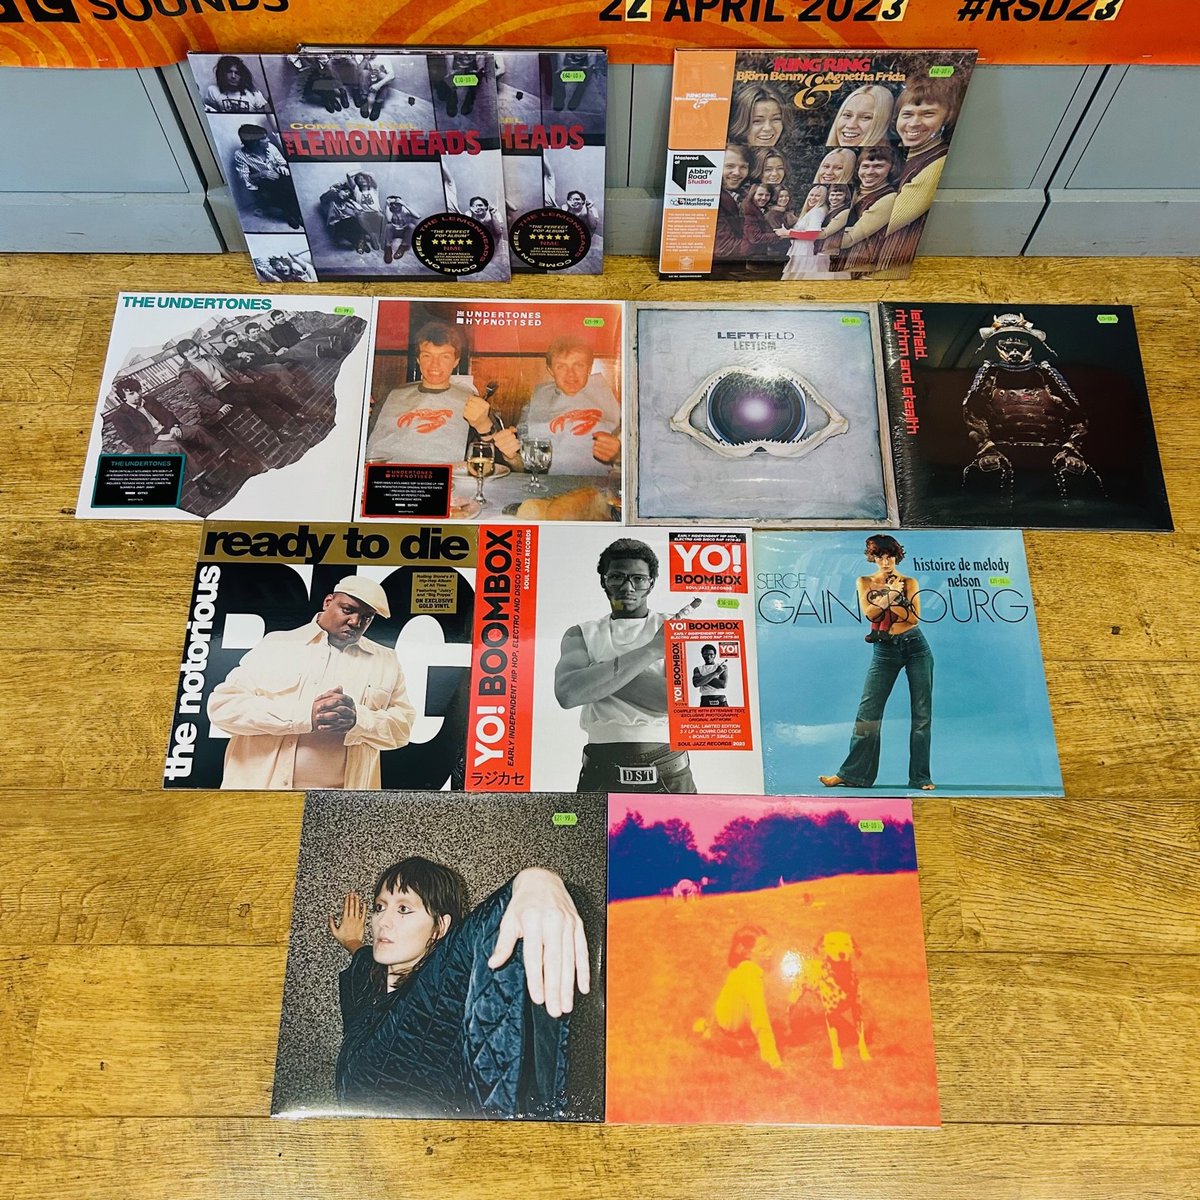 Reissues from @ABBA, @TheLemonheads, @THE_EELS, @Leftfield, @TheUndertones_, Cate Le Bon and a new @SoulJazzRecords Boombox compilation. #WaxUpdate